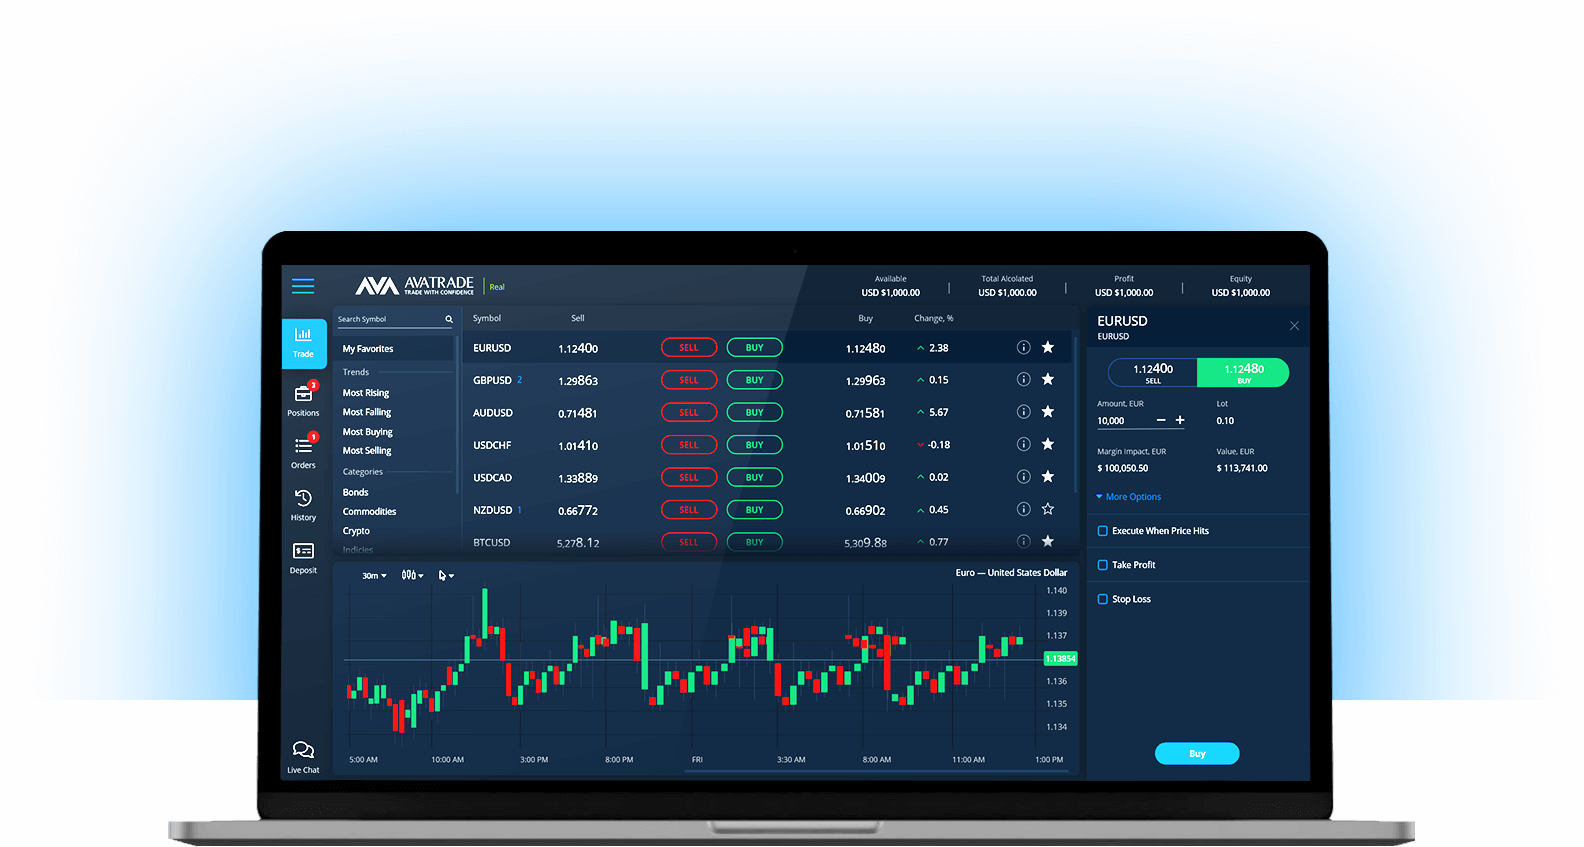 Web Trading Platform - Trade from your Browser | AvaTrade